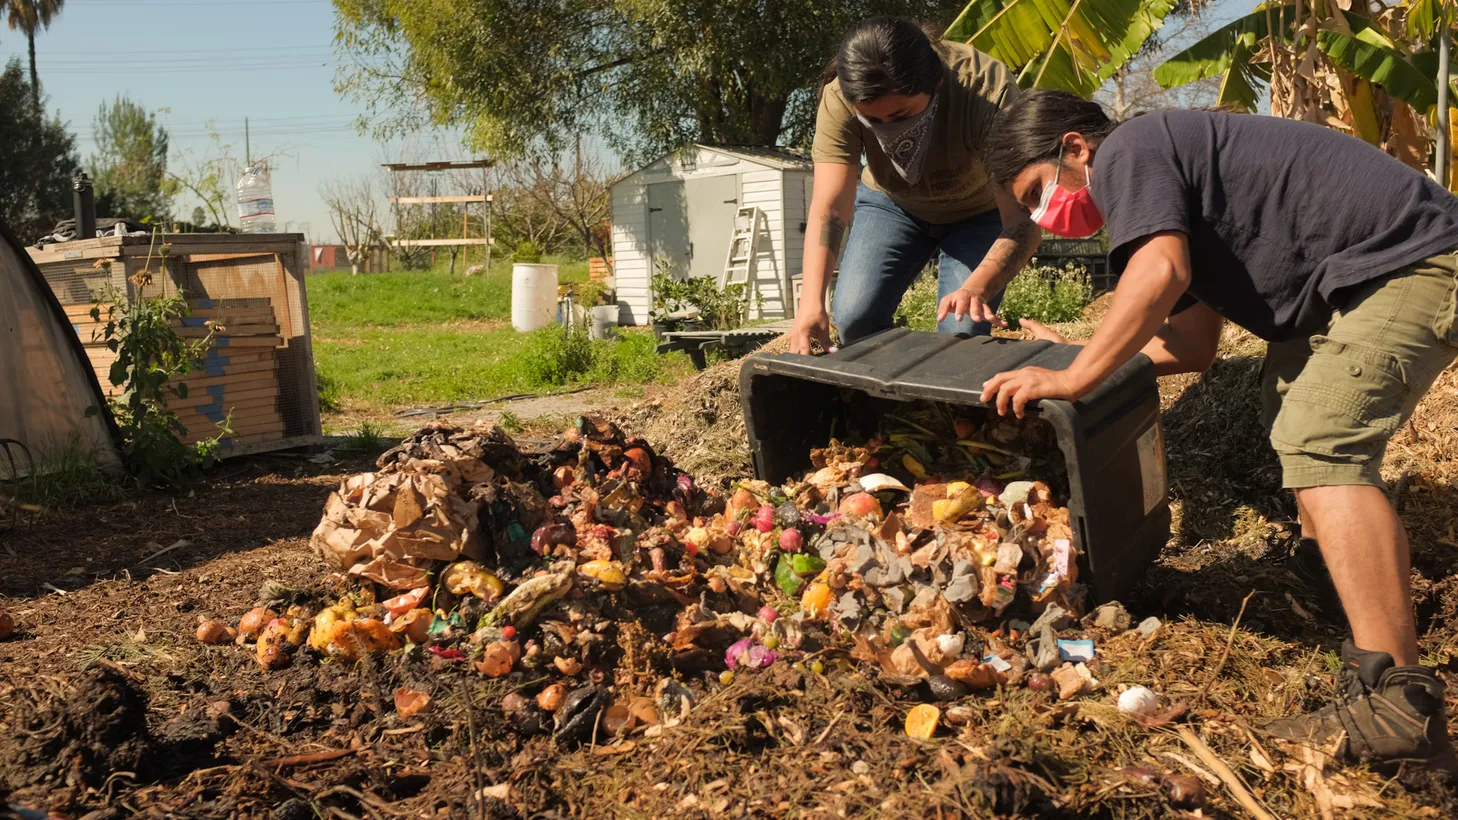 LA Compost works to convert edible food waste back to the soil.